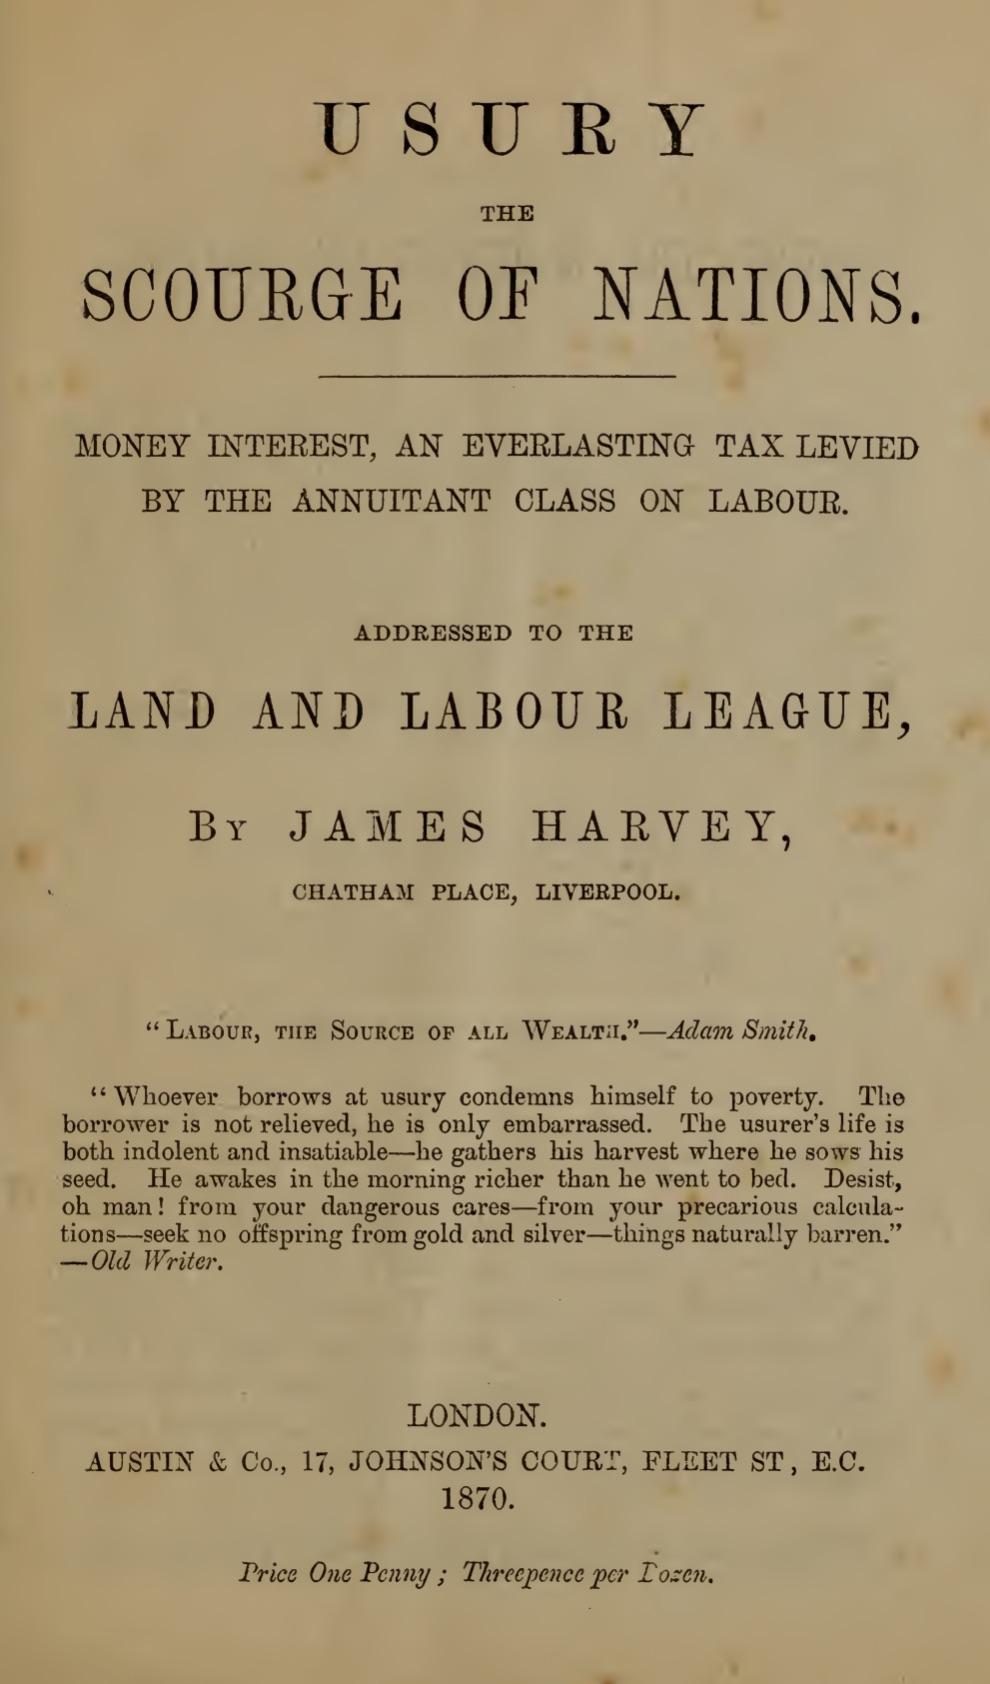 Usury the Scourge of Nations. Money Interest an Everlasting Tax Levied by the Annuitant Class on Labour. Addressed to the Land and Labour League (1870) by James Harvey